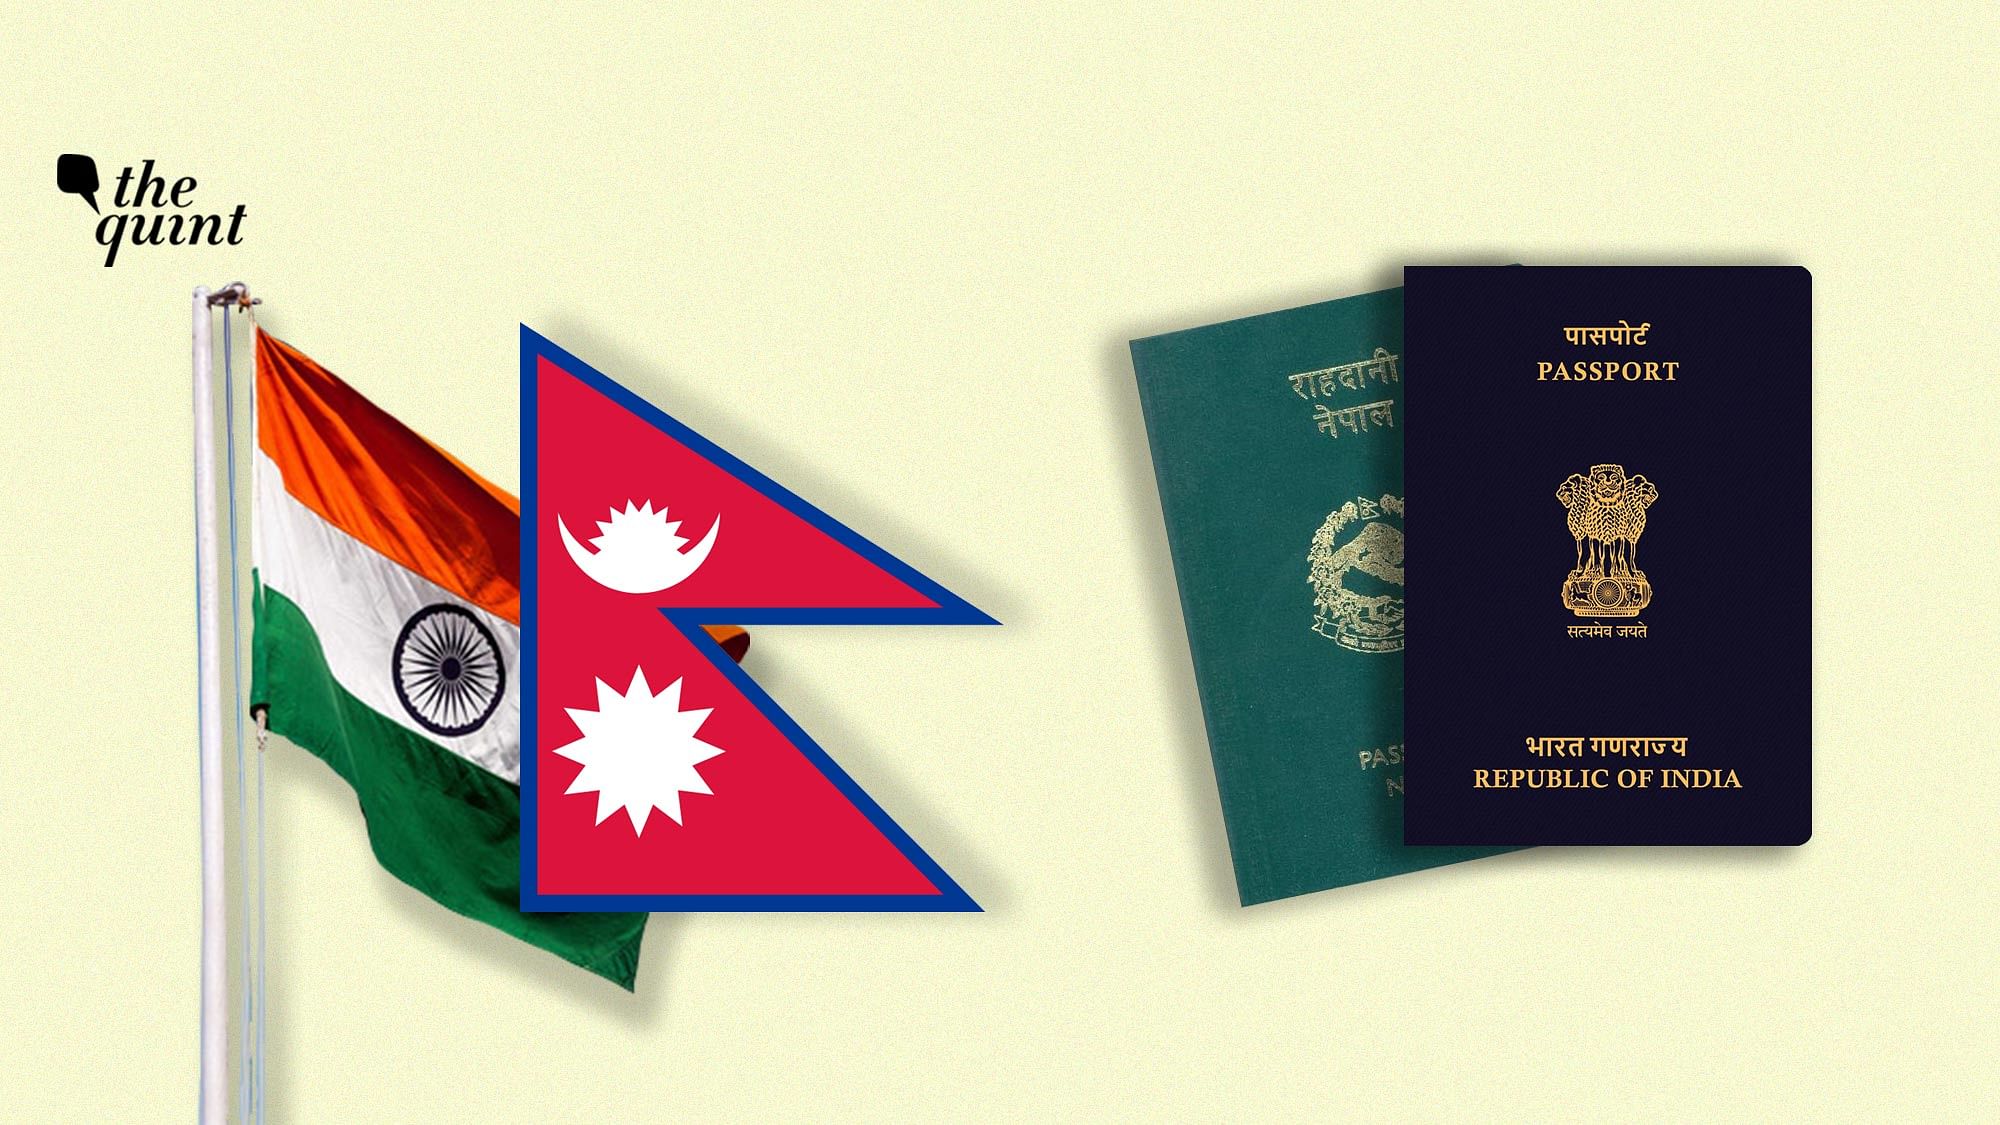 Image of Indian and Nepali flags and passports used for representational purposes.